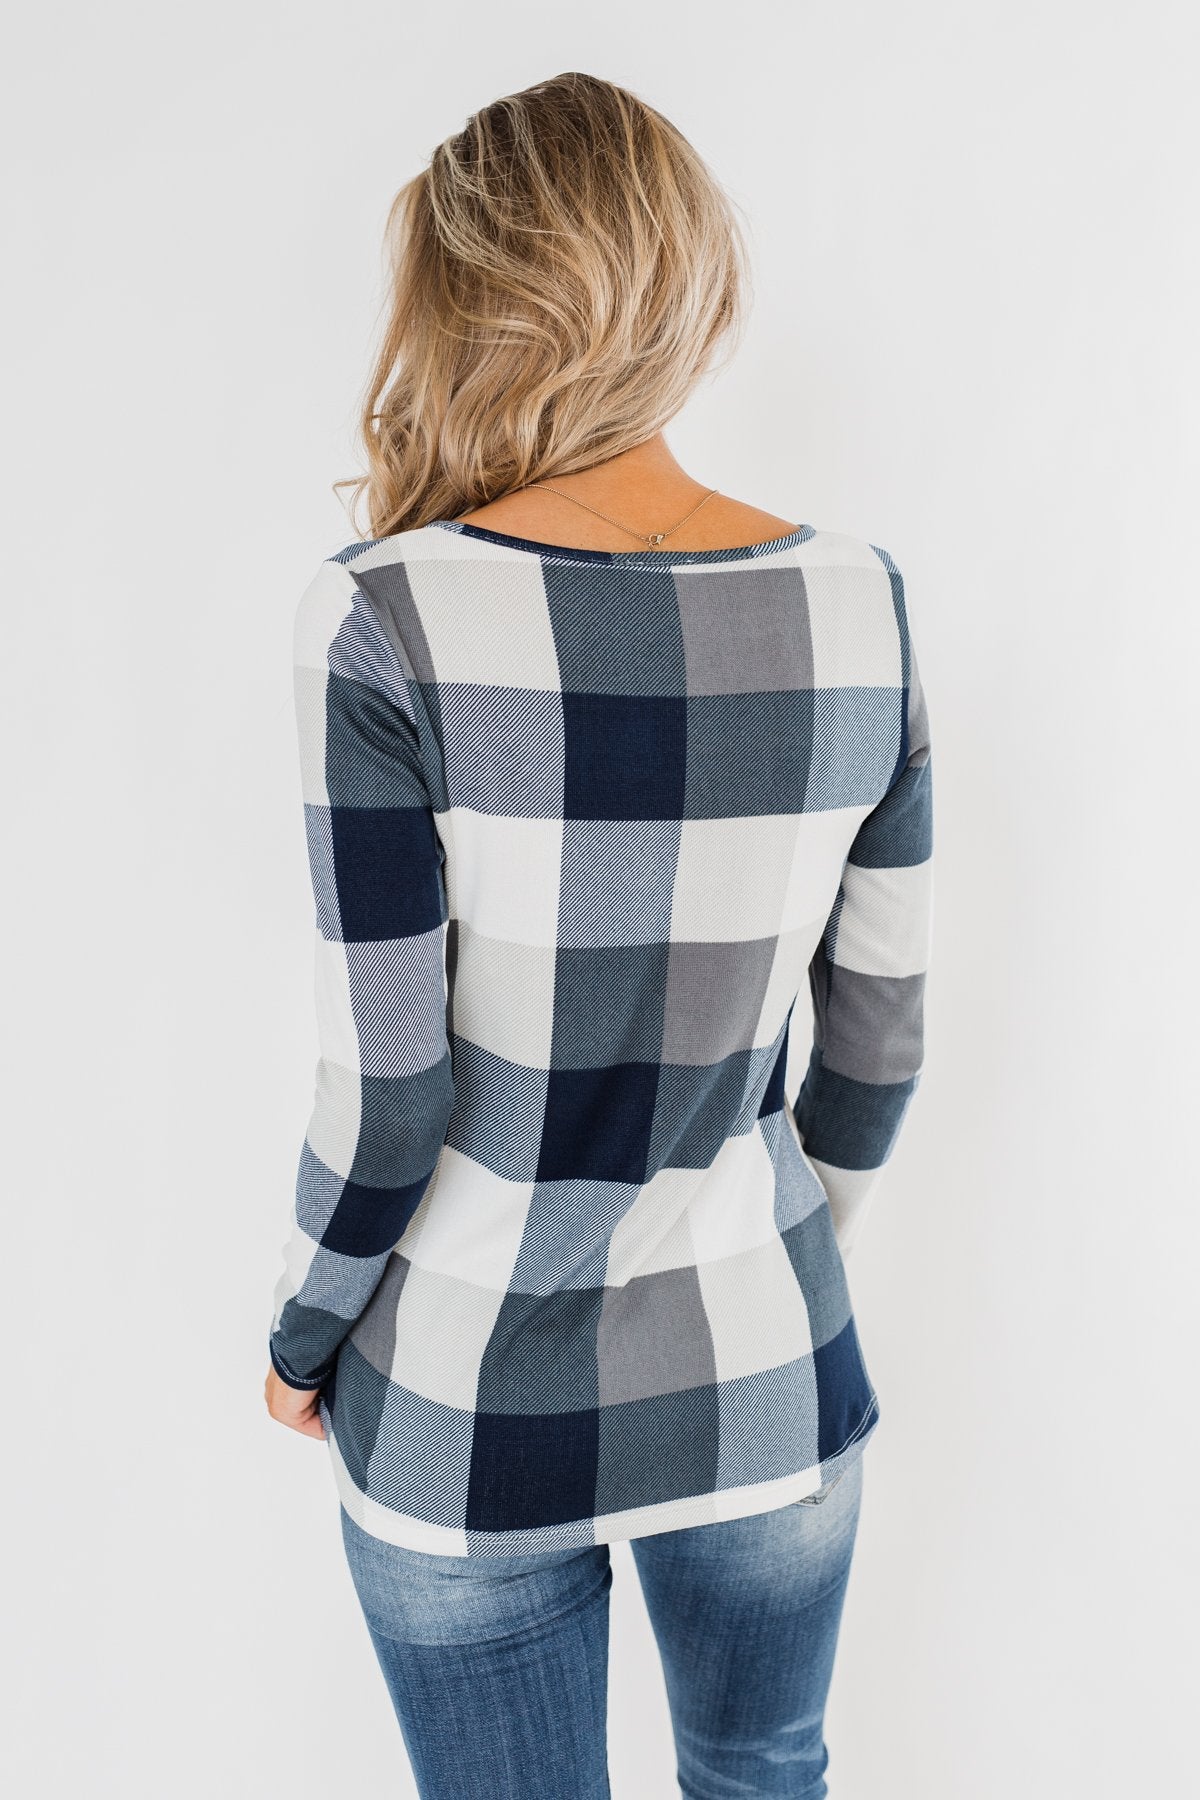 Dreaming About You Plaid Top- Navy & Ivory